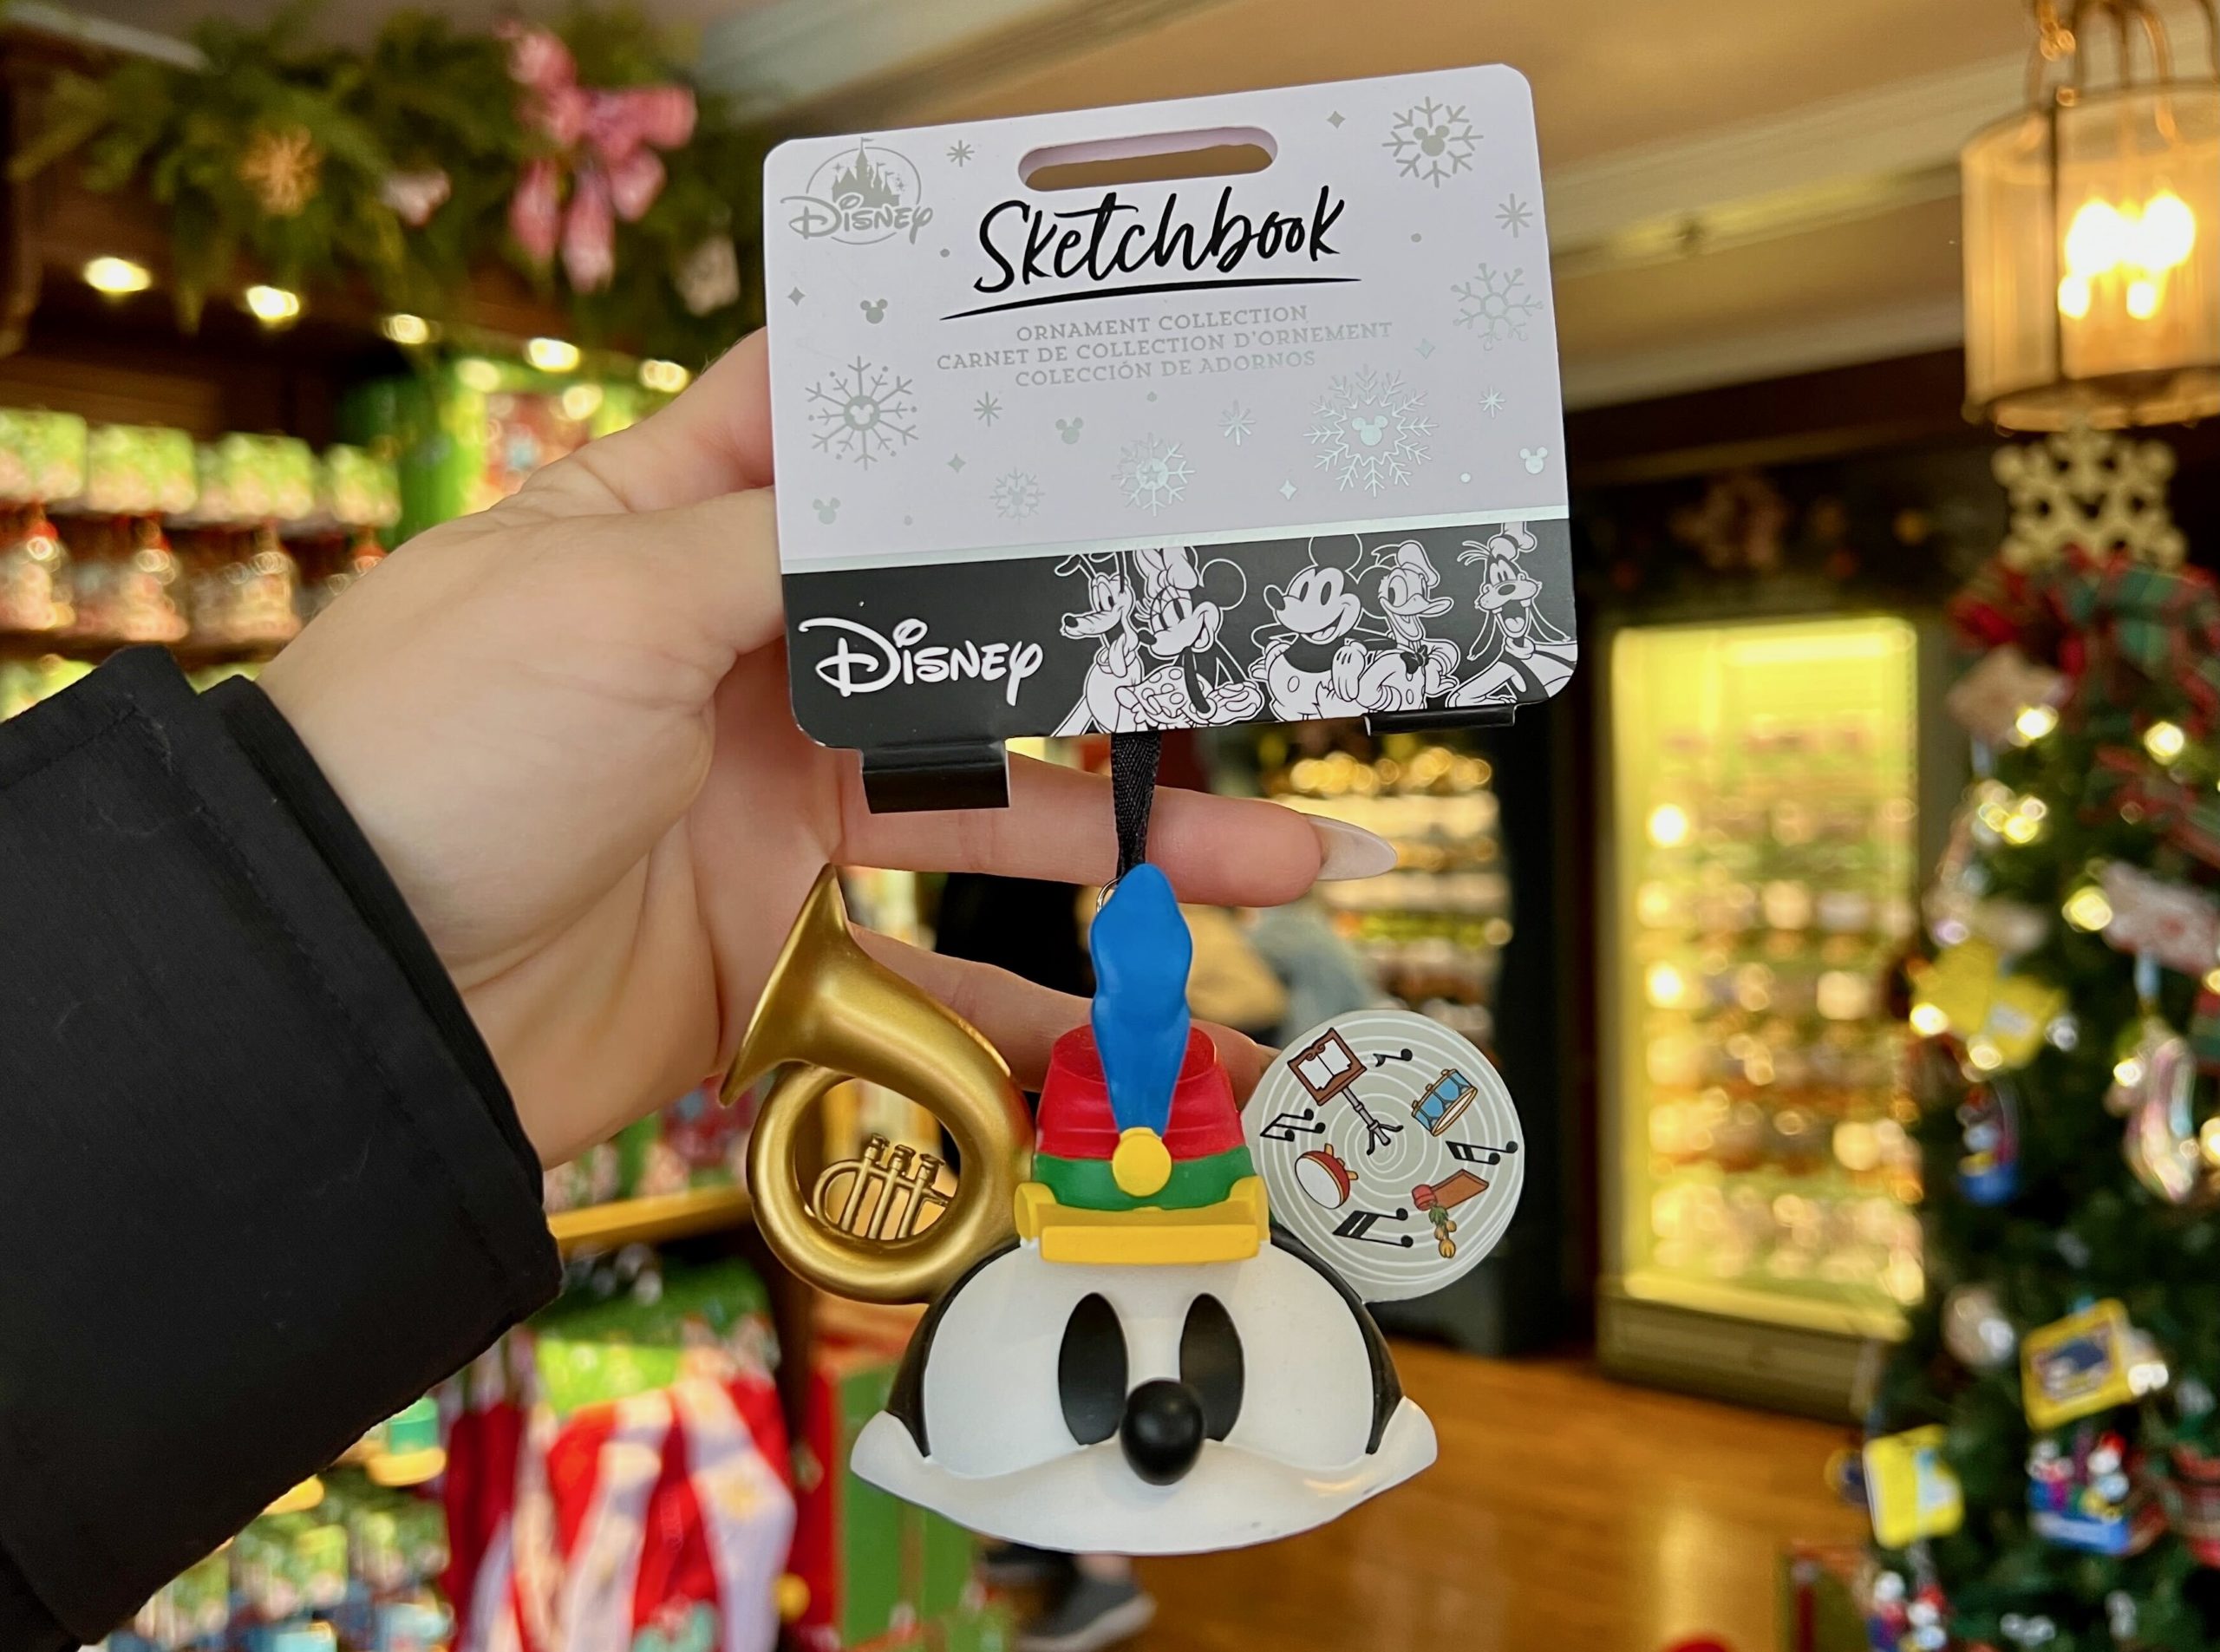 Mickey Sketchbook Ornament band